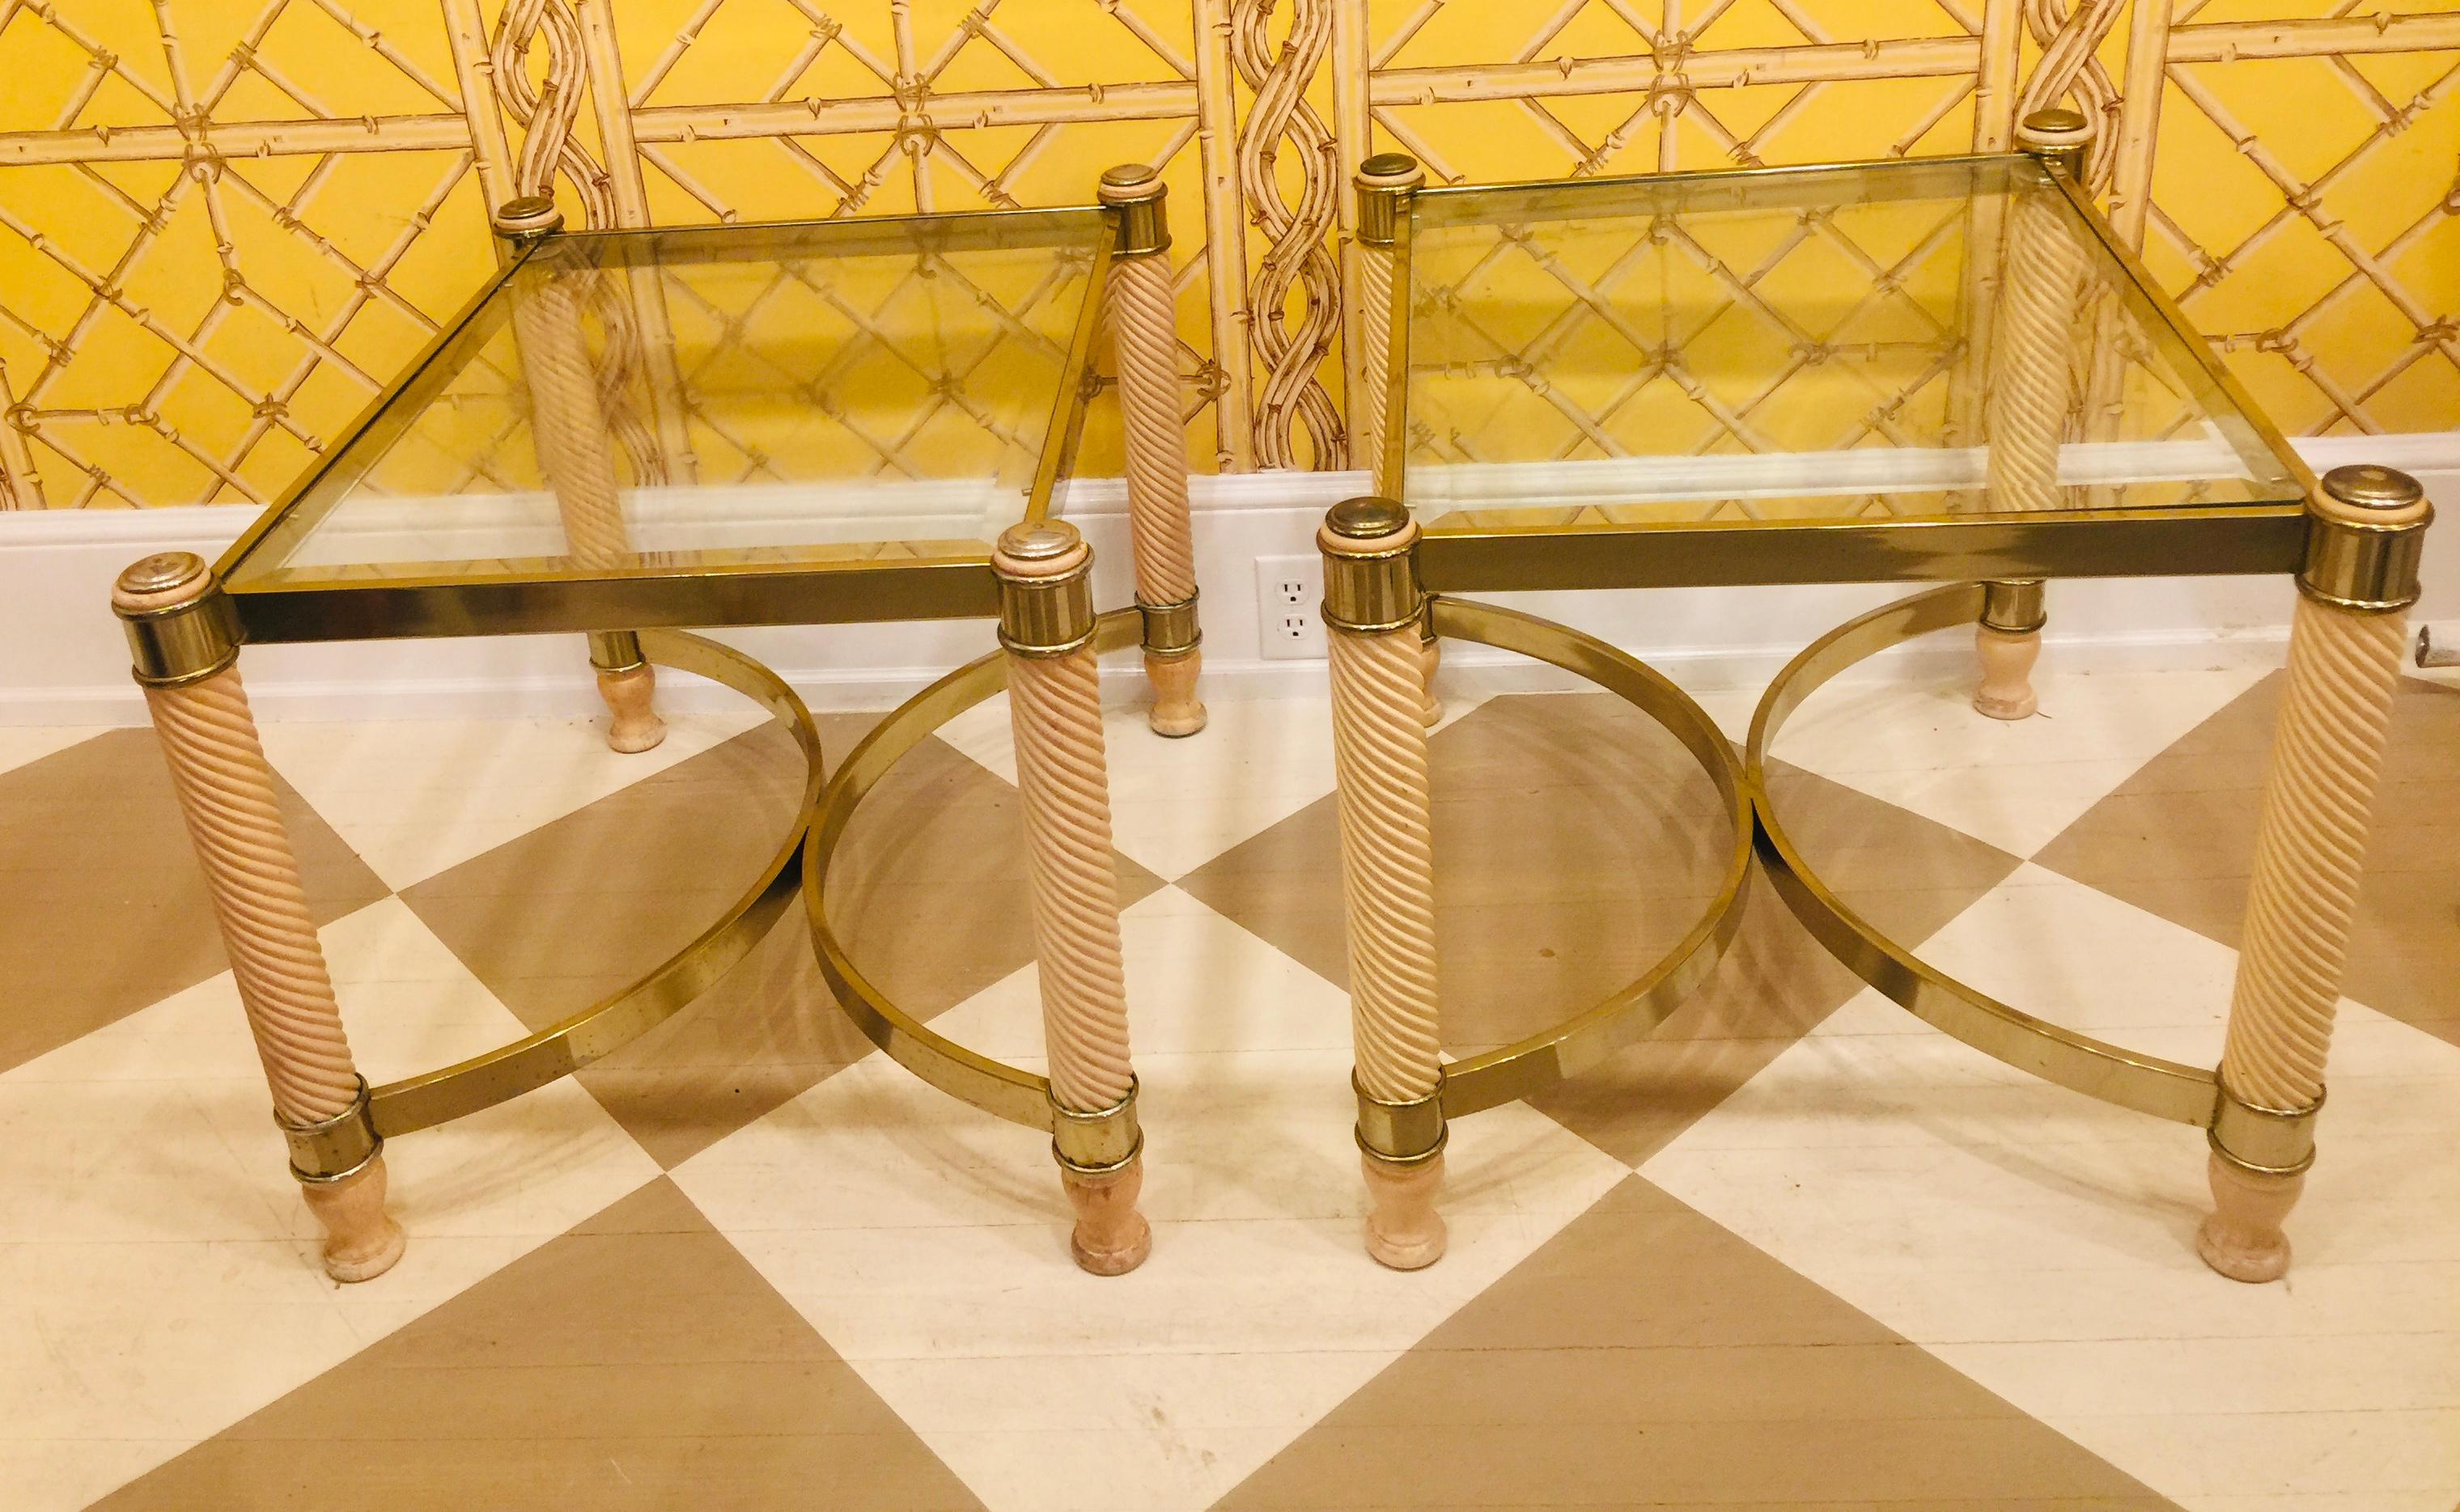 Pair of early 20th century English gilt metal, carved wood, glass top end tables, cocktail tables. Legs of carved turned form painted in faux ivory color to resemble
Carved ivory.